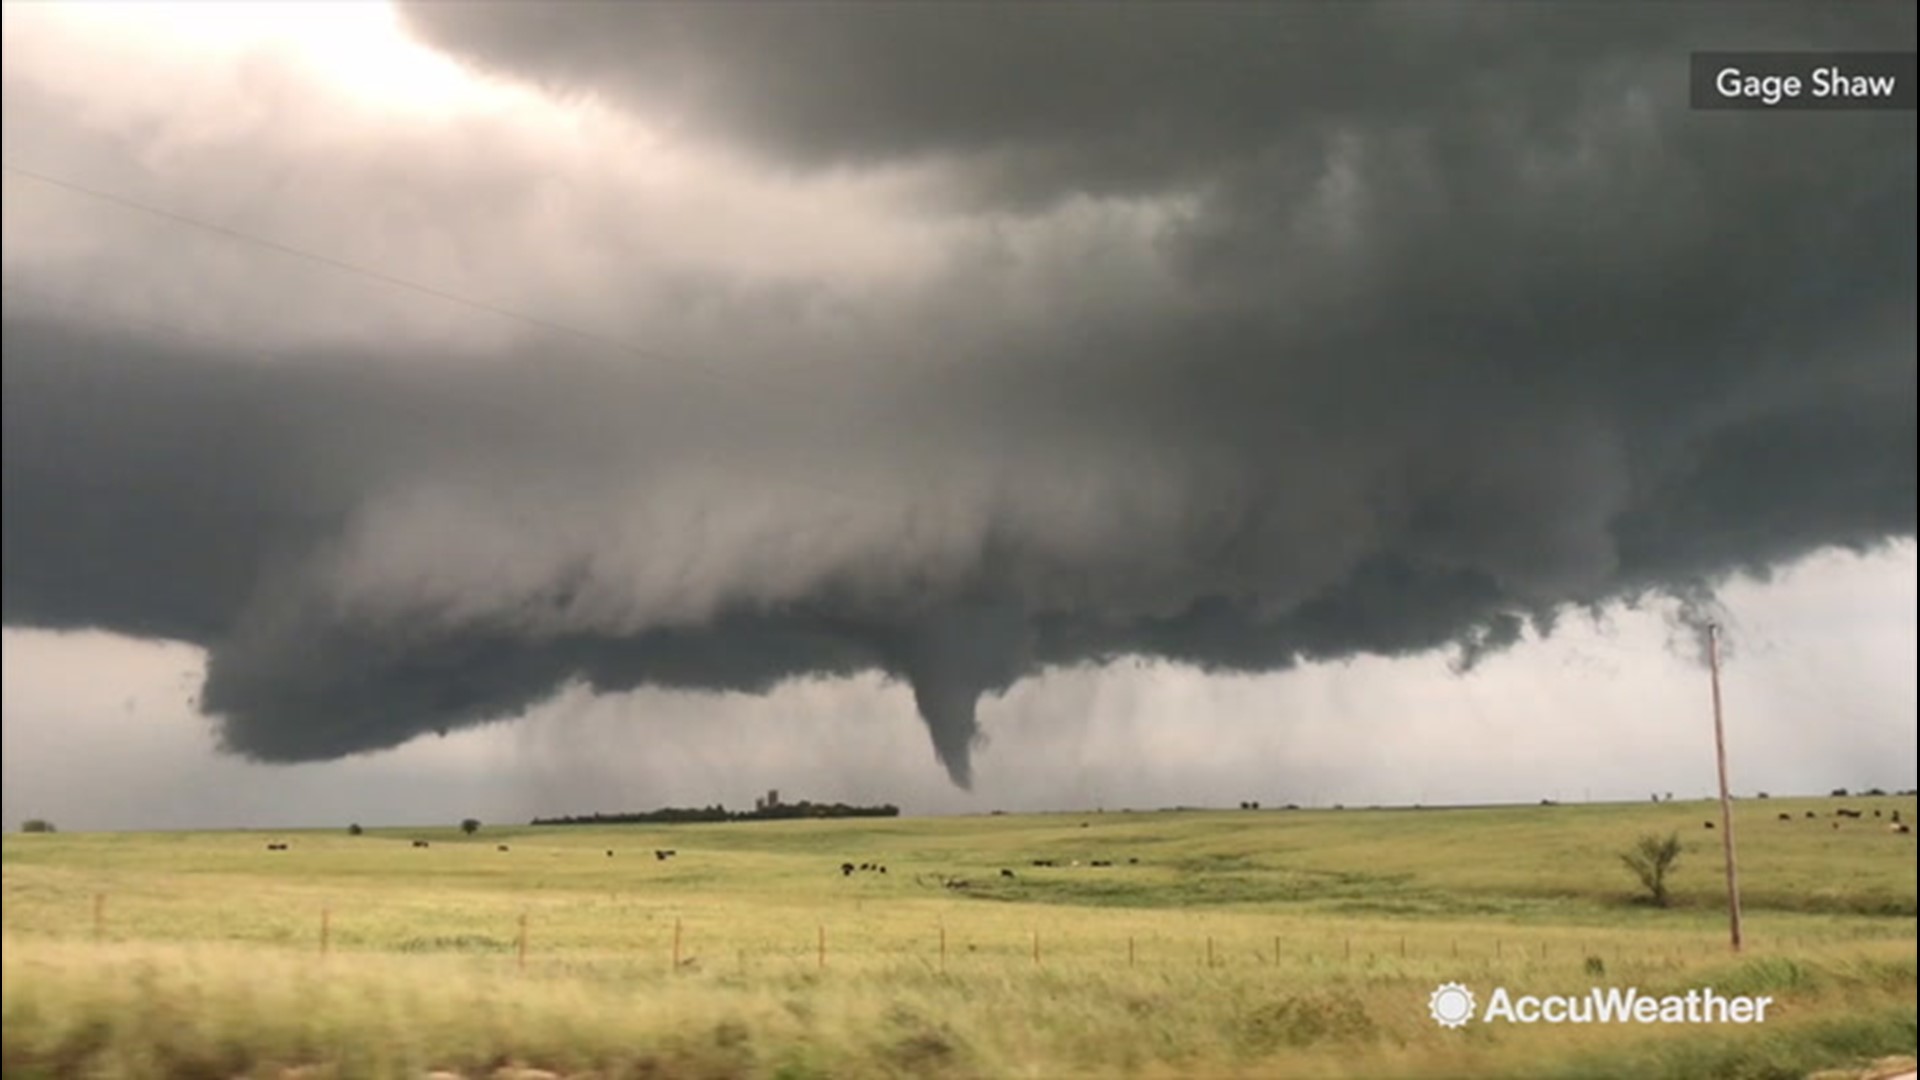 Storm chaser Gage Shaw spotted this large tornado ripping through an area near Alta Vista, Kansas, on Aug.15.